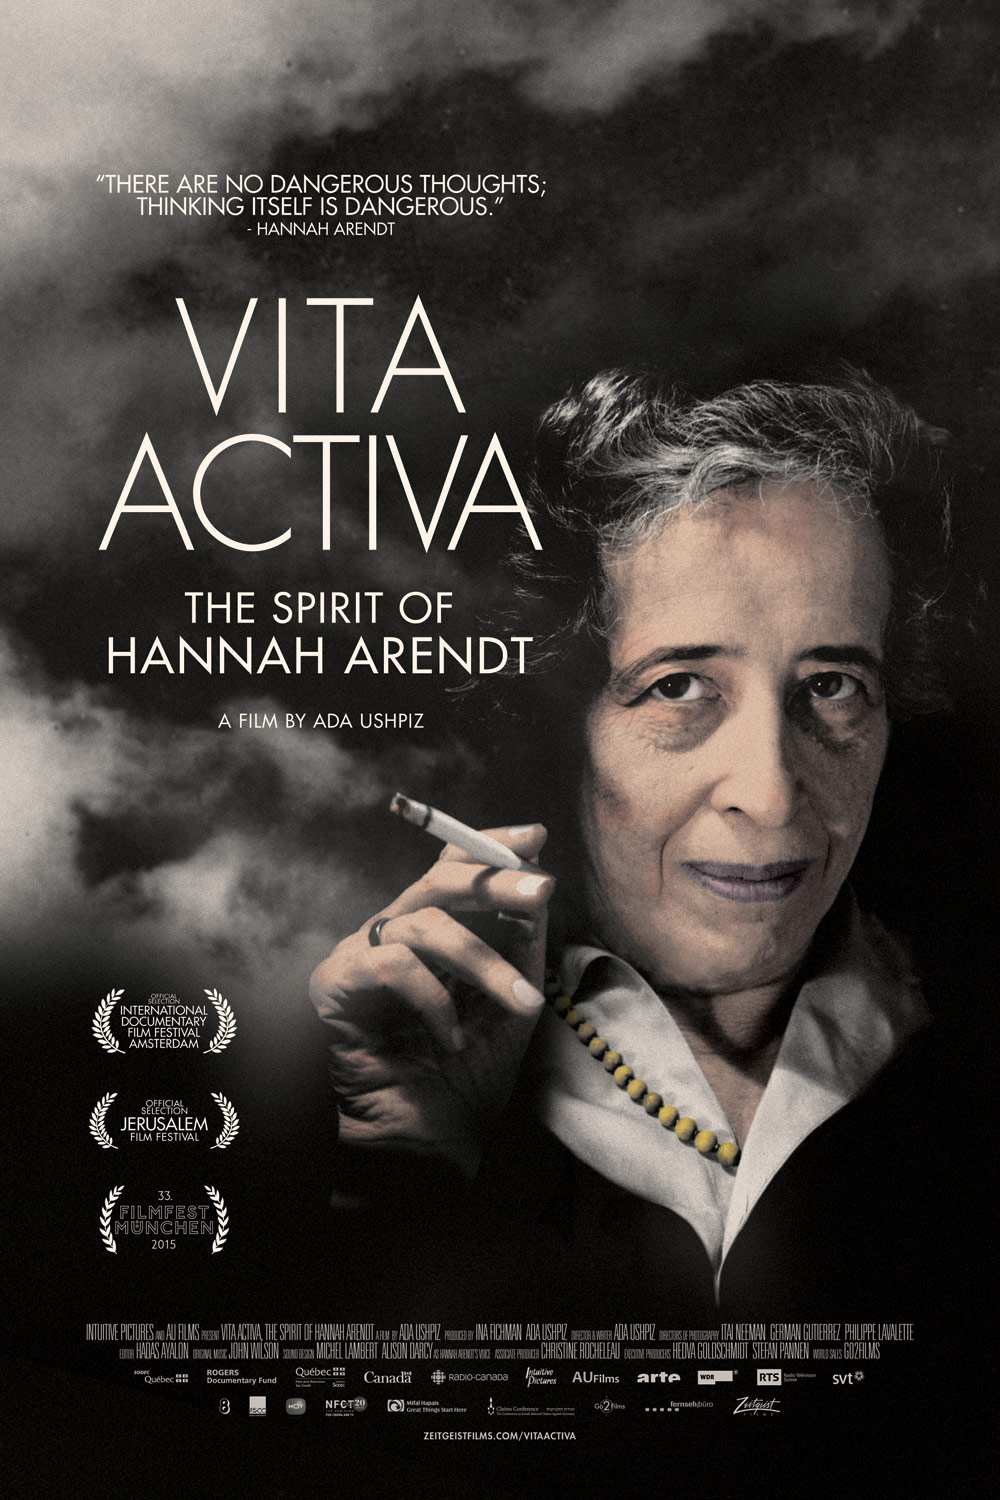 Movie poster for Vita Activa, Hannah Arendt smoking cigarette